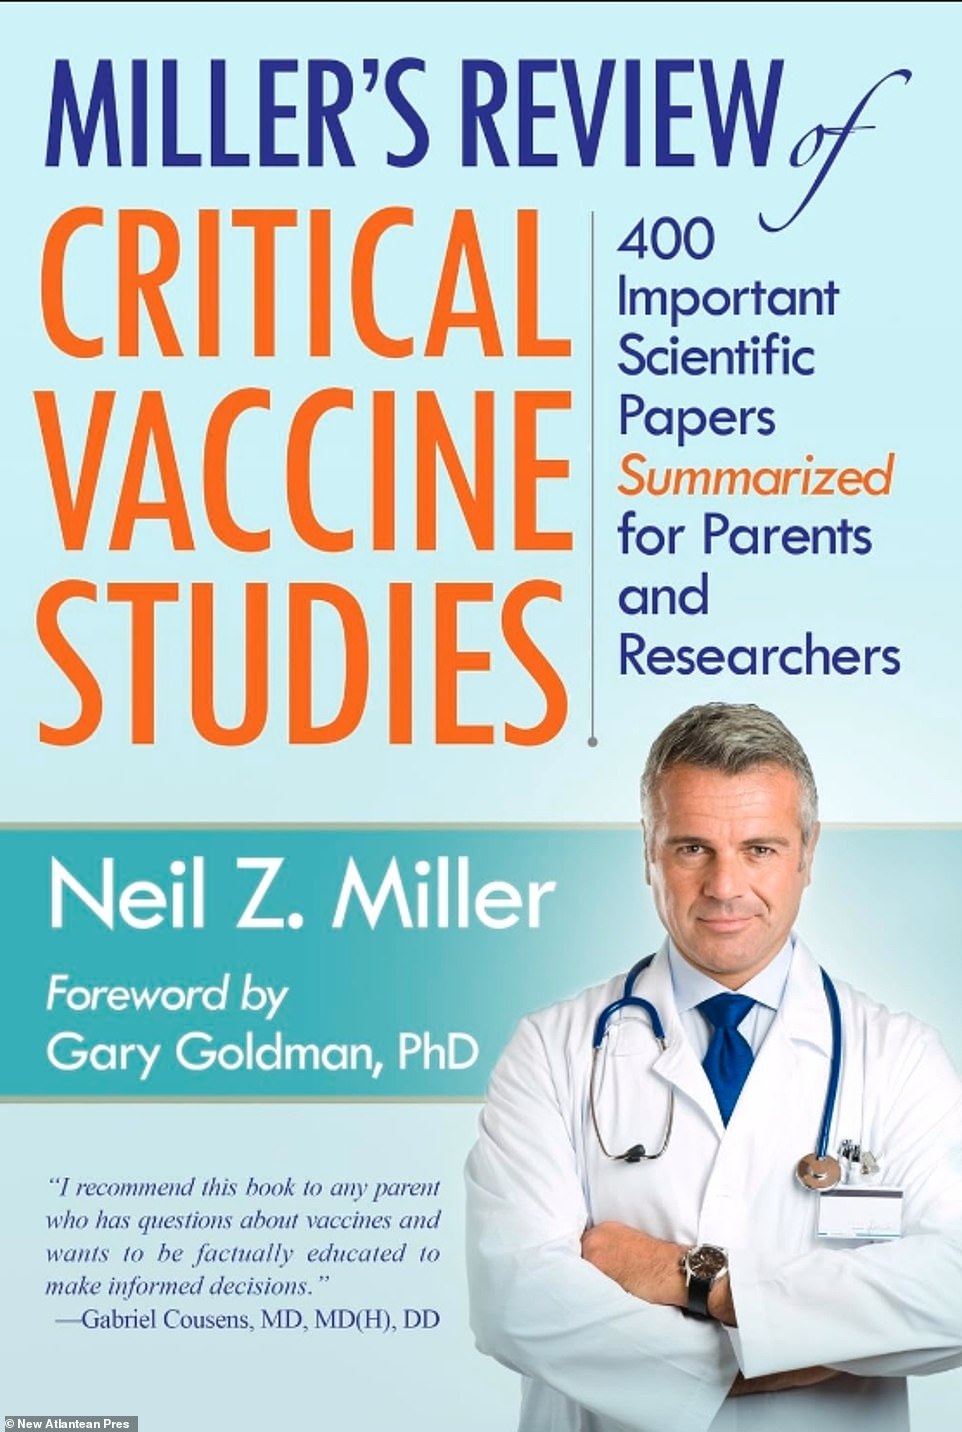 One of the 43 books added to this list was one by author Neil Miller titled 'Miller's Review of Critical Vaccine Studies: 400 Important Scientific Papers Summarized for Parents and Researchers,' which was released in 2016. Speaking exclusively with DailyMail.com, Miller slammed the White House and Amazon for censoring his book, 'If my book is being censored, they are censoring medical and scientific literature. I do not agree with modern-day book burning.' 'My book is not political,' Miller continued. 'It contains summaries of 400 studies taken from the National Library of Medicine.'